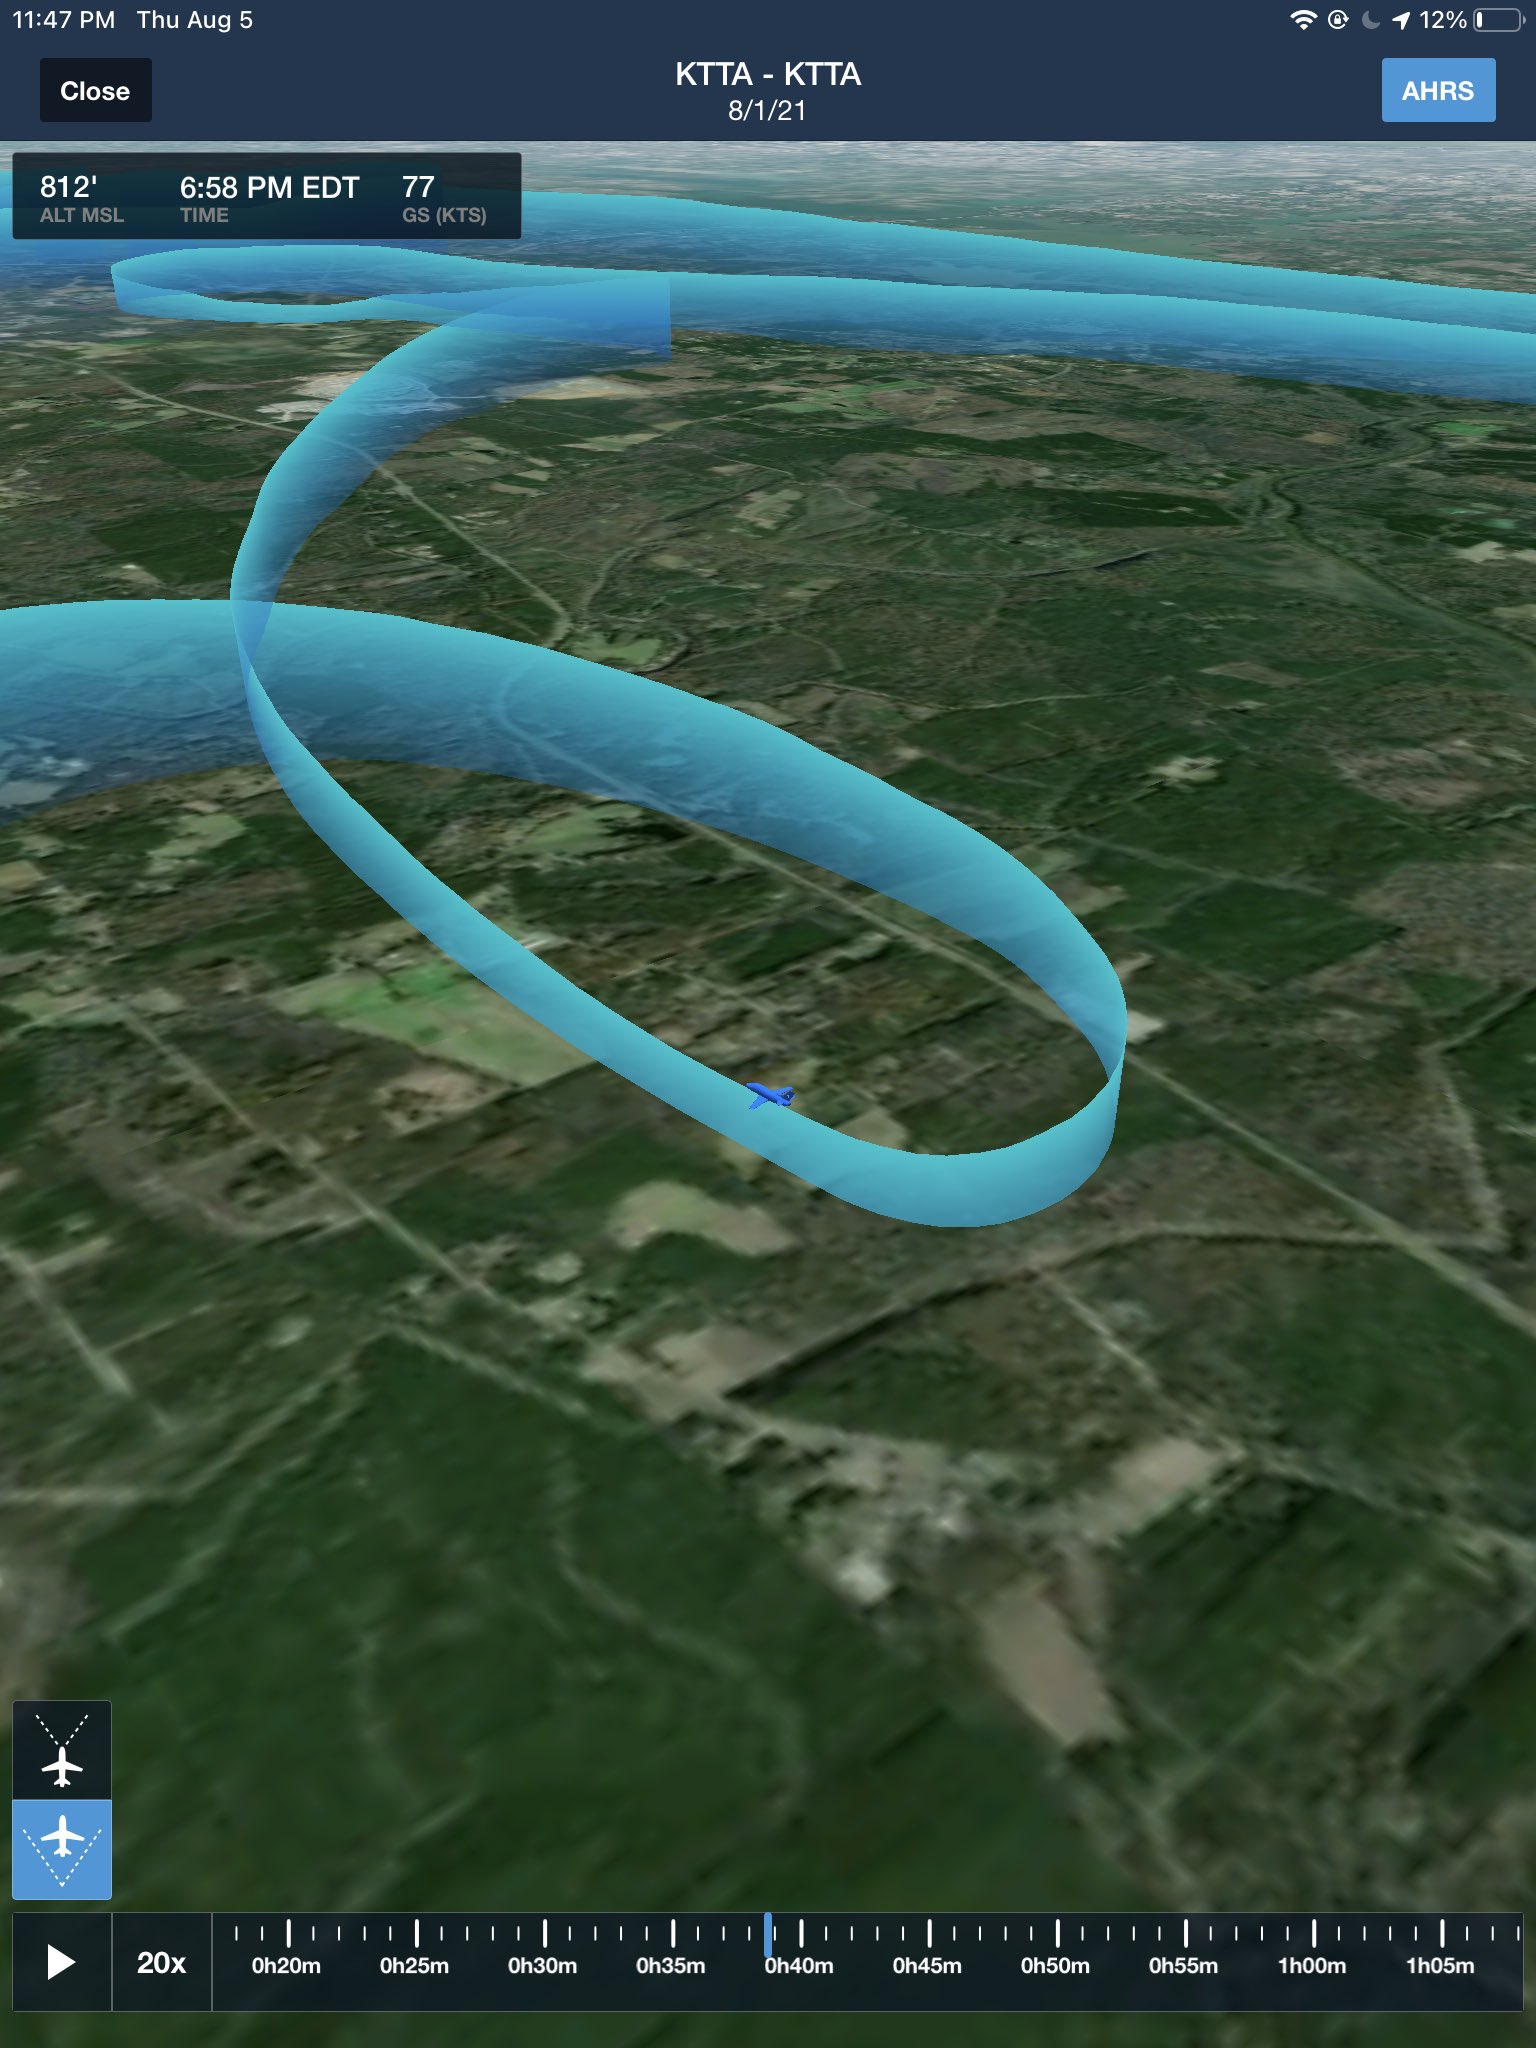 Just a 3d diagram of the flight, not sure what I was focusing on here.